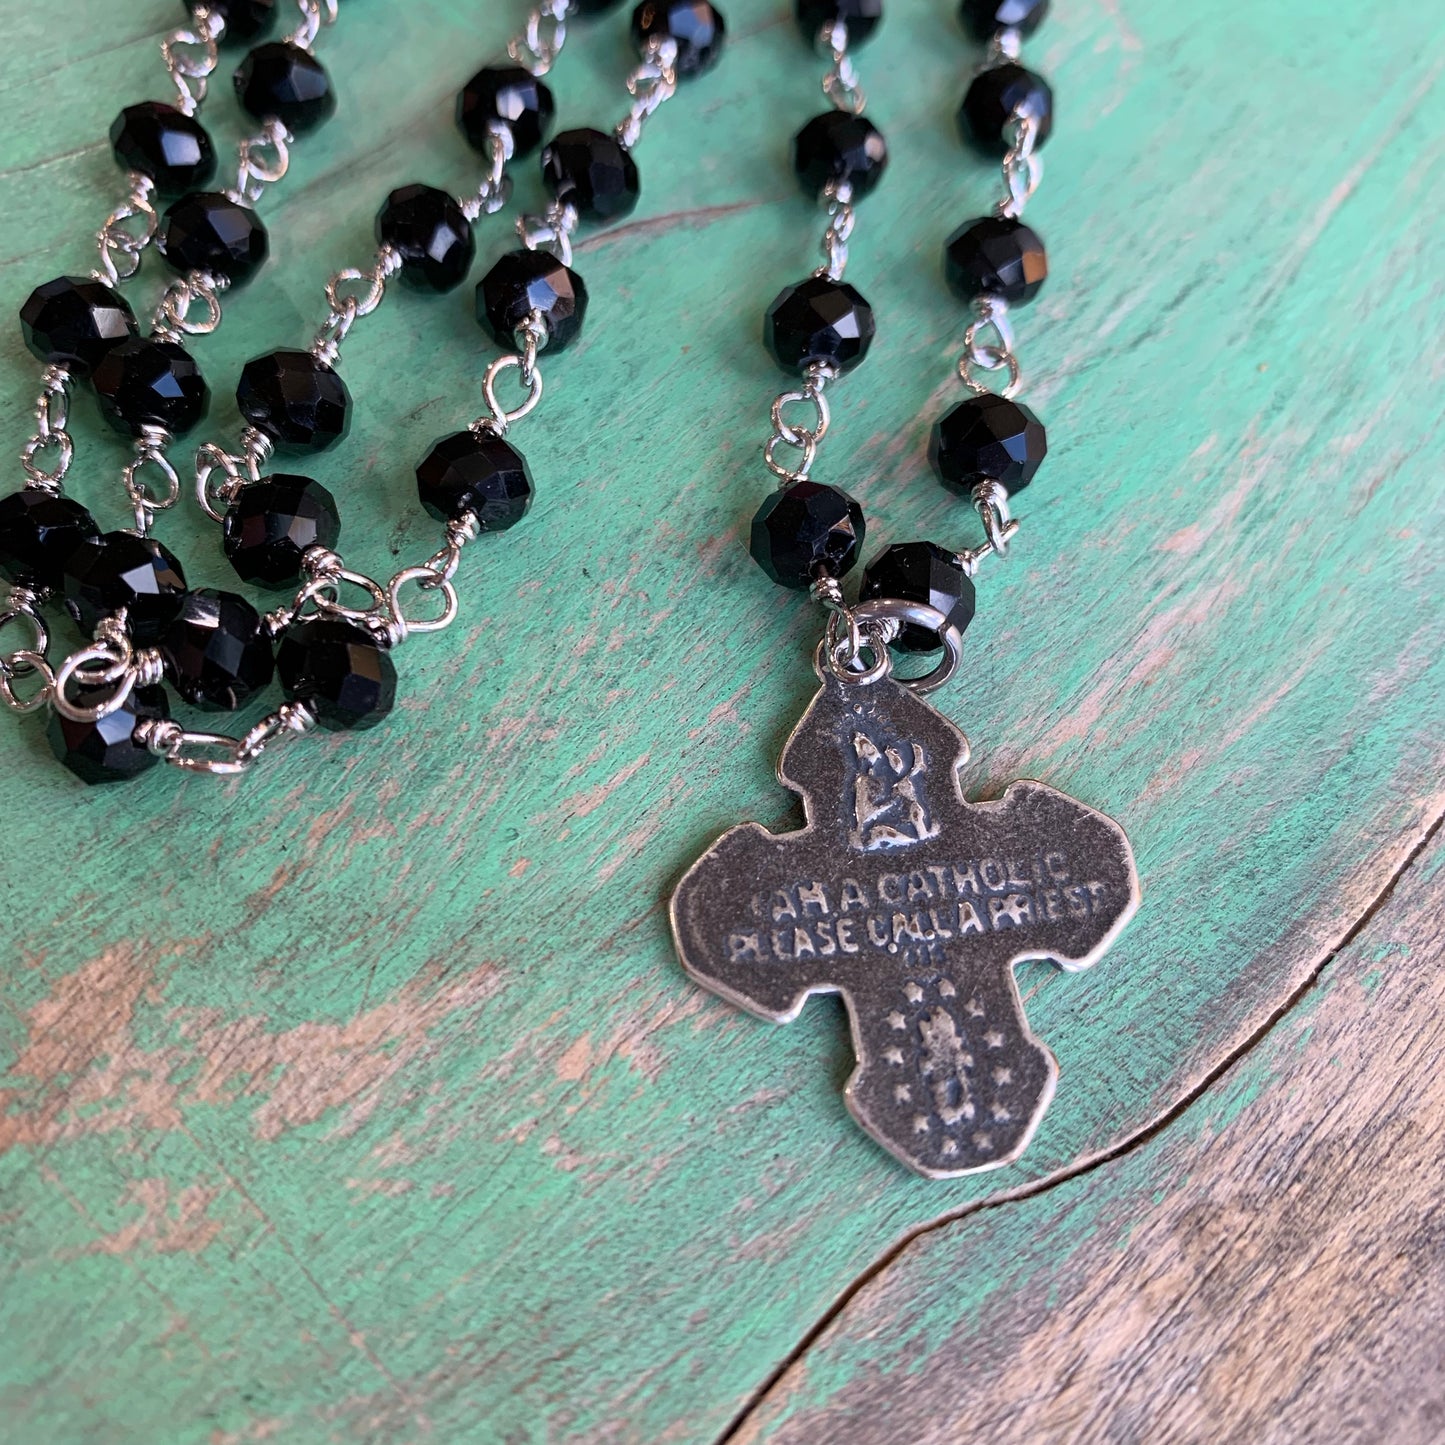 Black and Silver 5 Way Cross Earrings, Bracelet, and Necklace